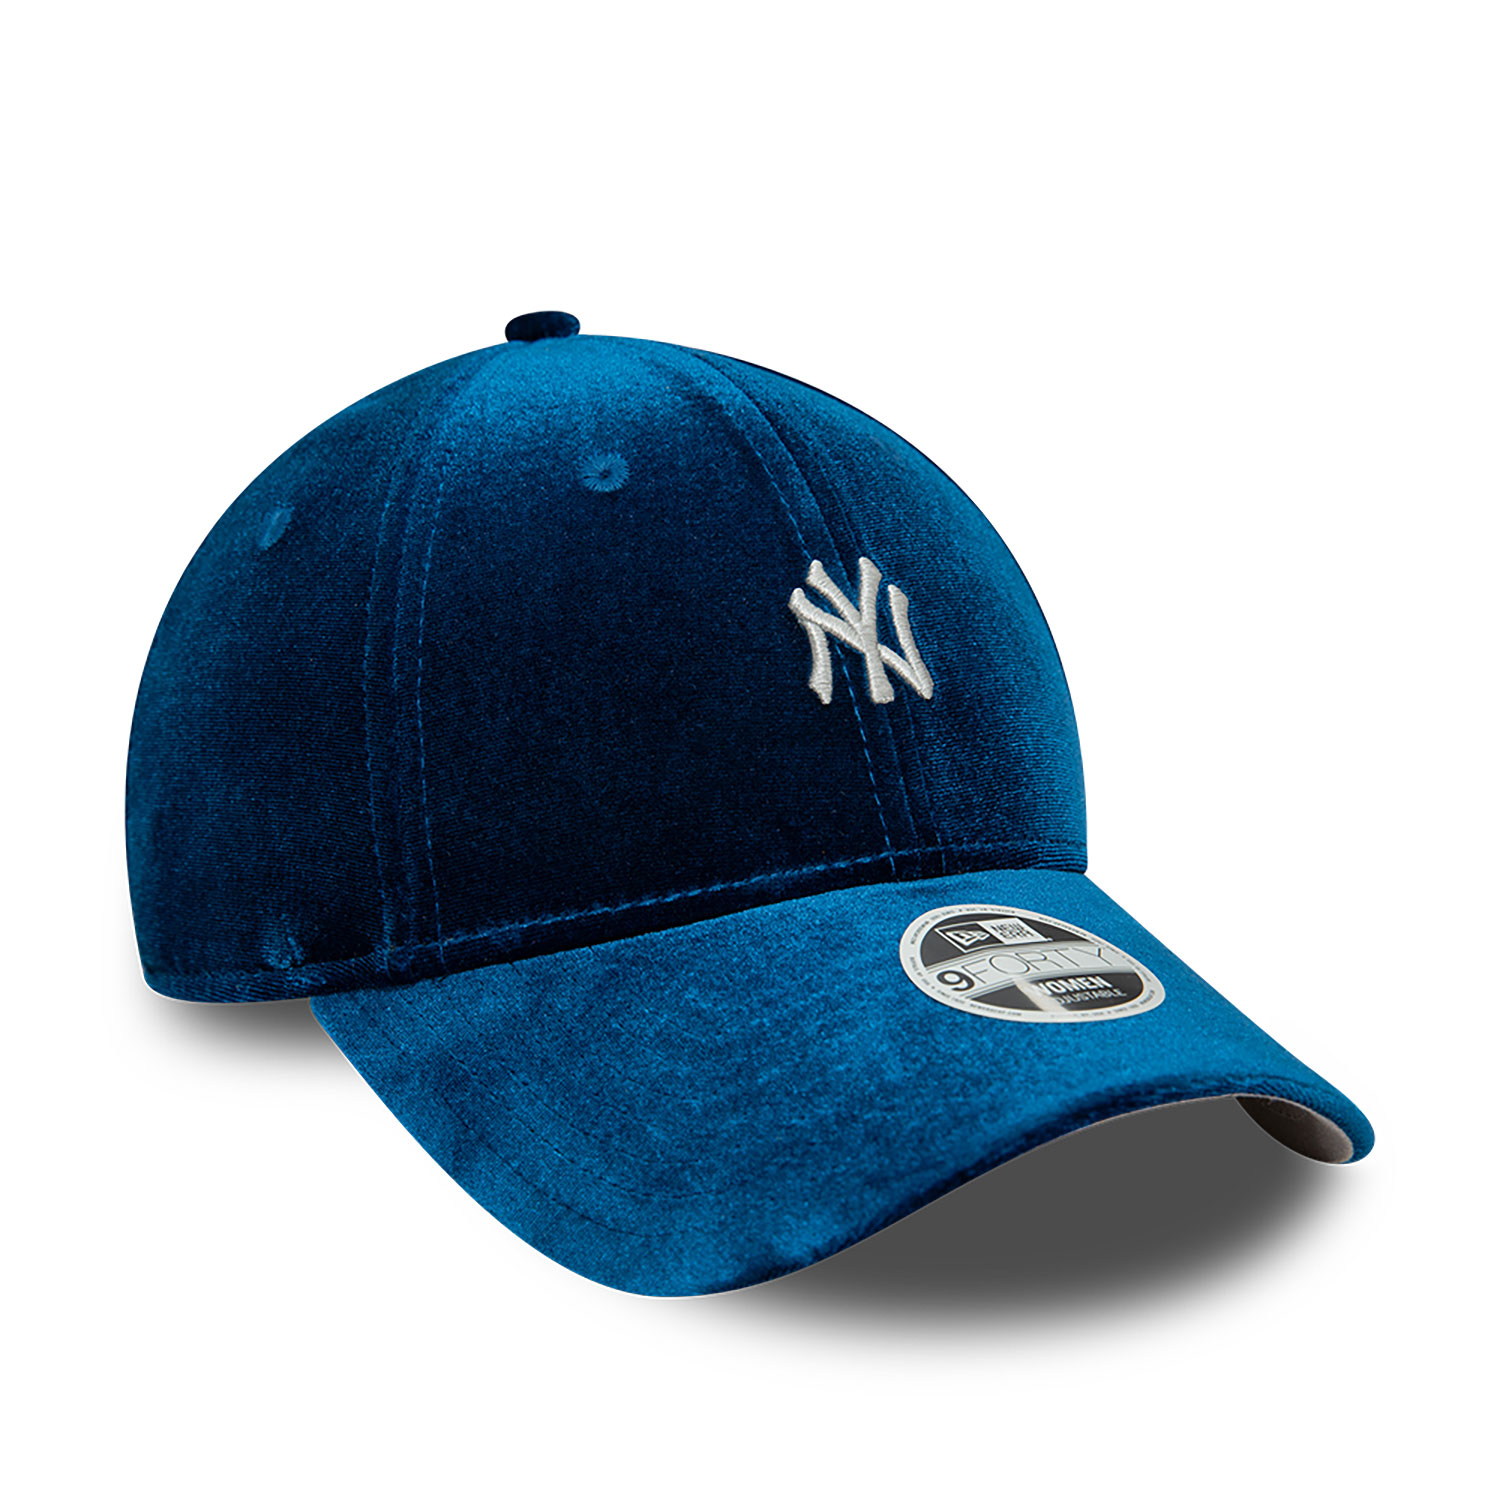 New York Yankees Womens Shimmer Blue 9FORTY Adjustable Cap